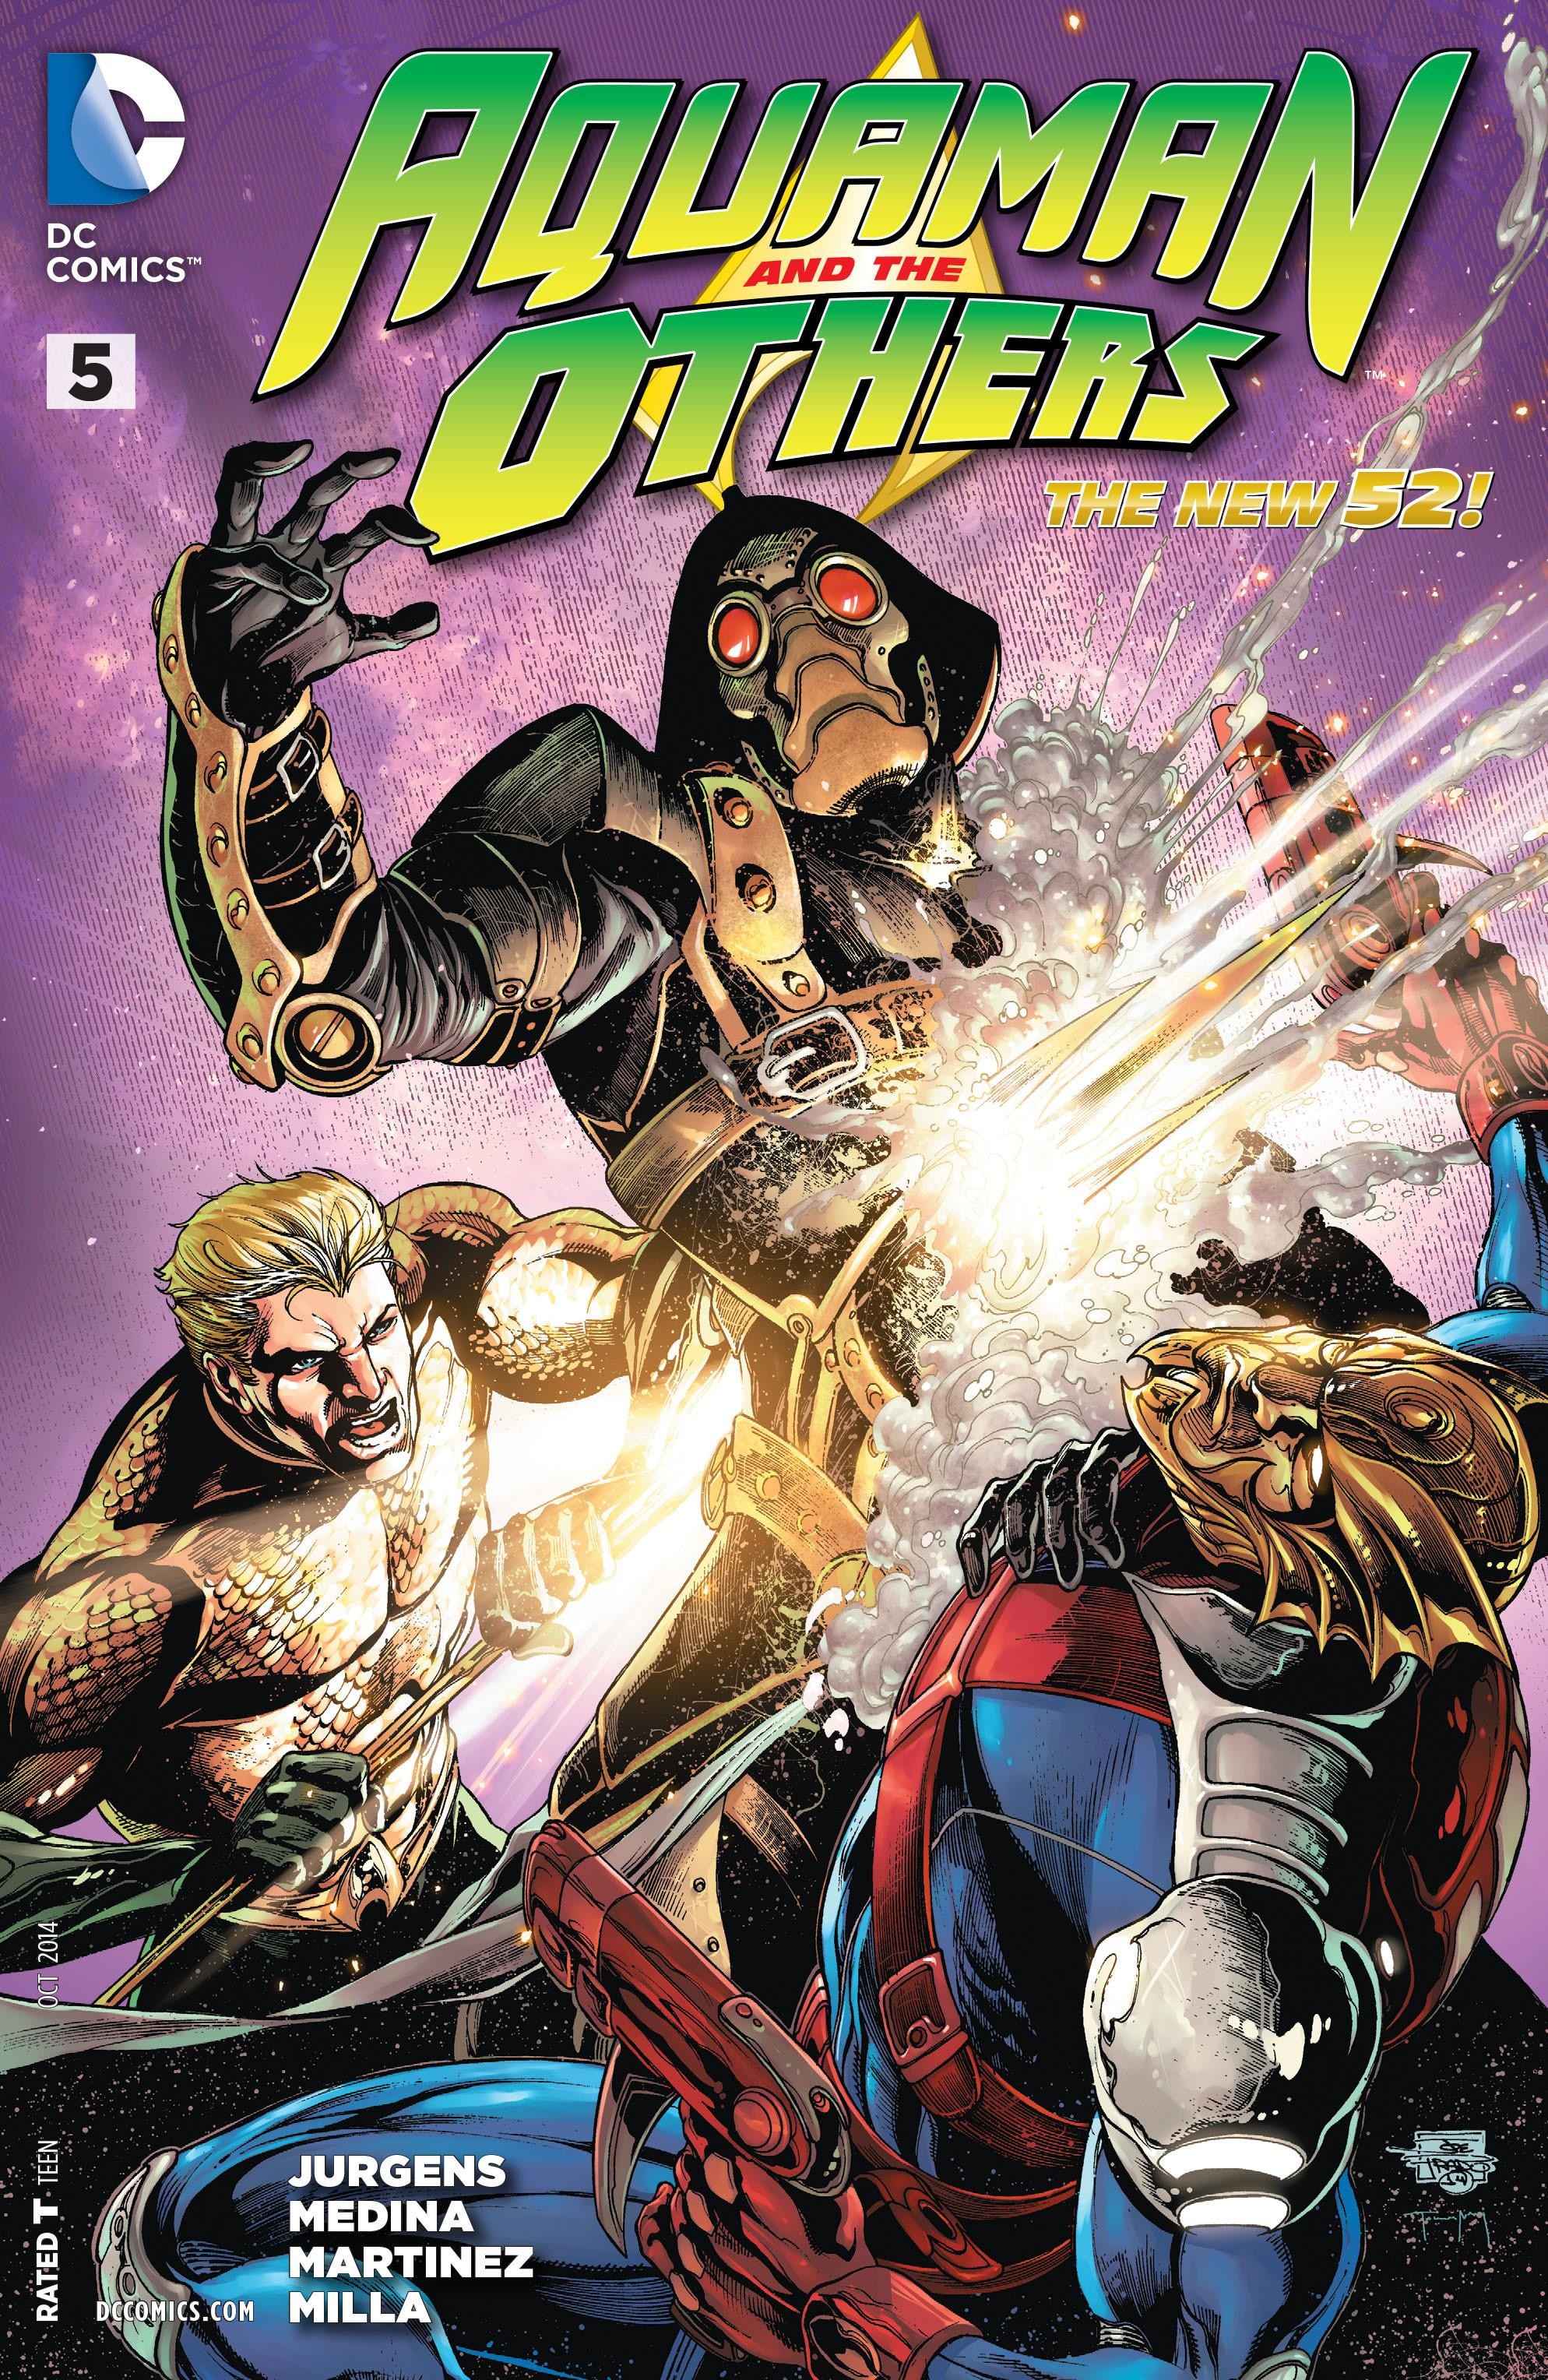 Aquaman and the Others Vol. 1 #5